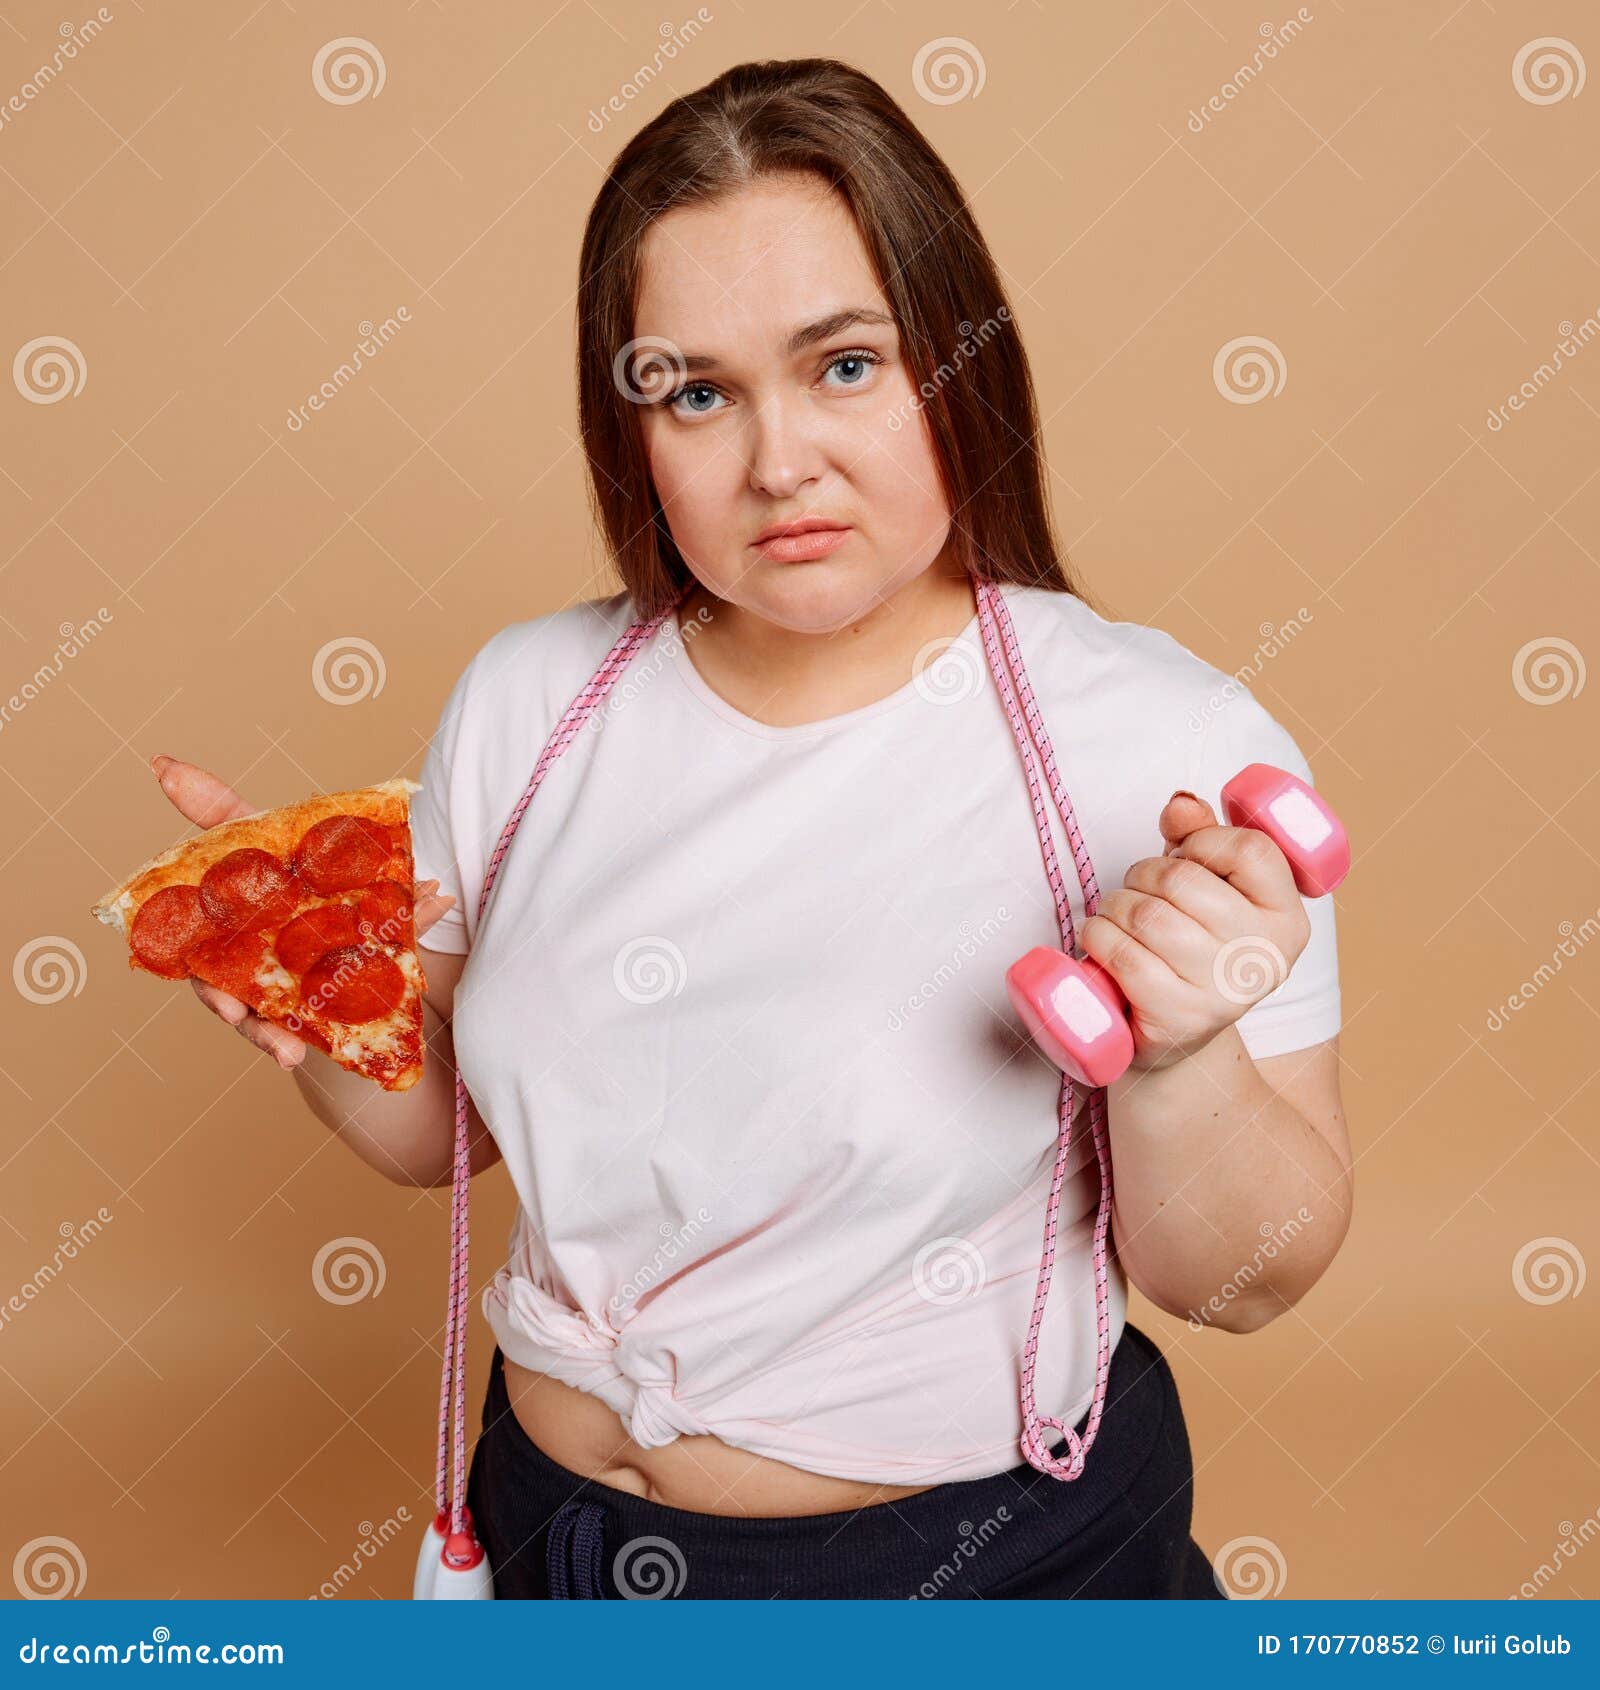 The fit pizza girl